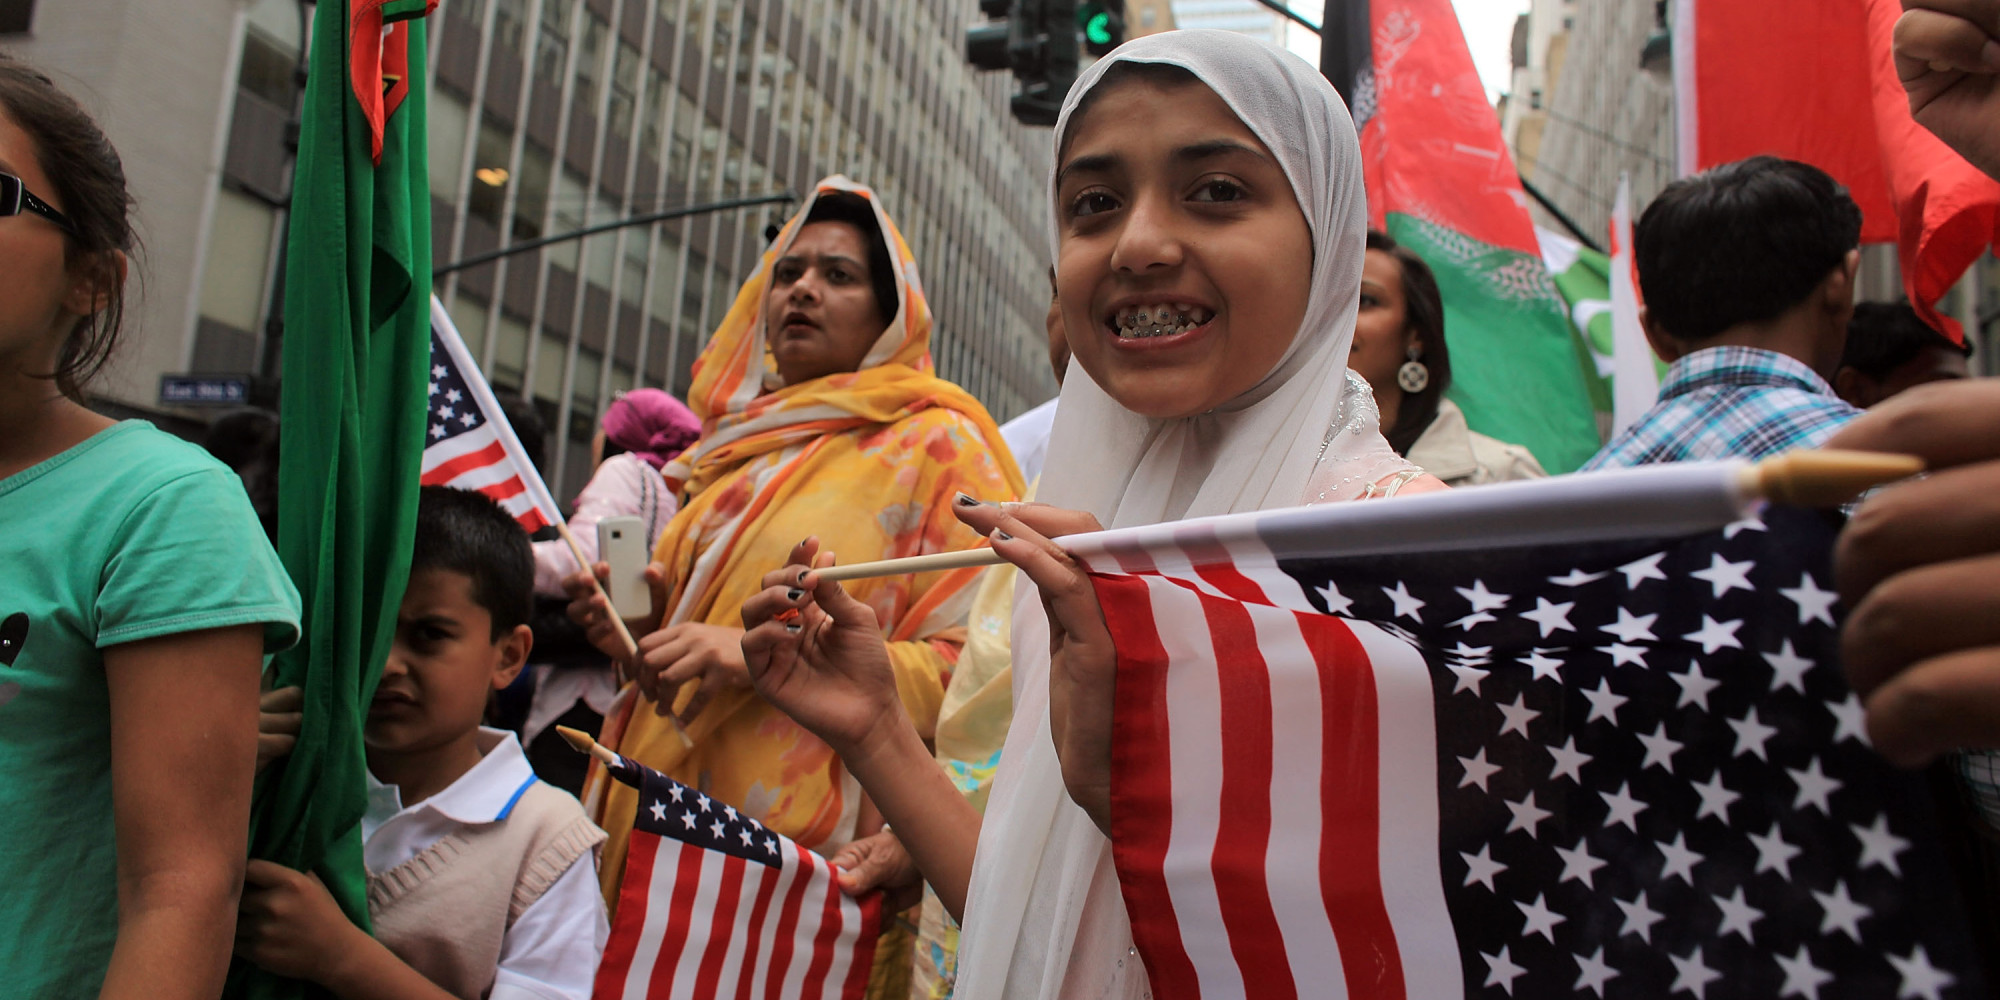 MuslimAmerican Demographics Reveal A Diverse Group That Rejects